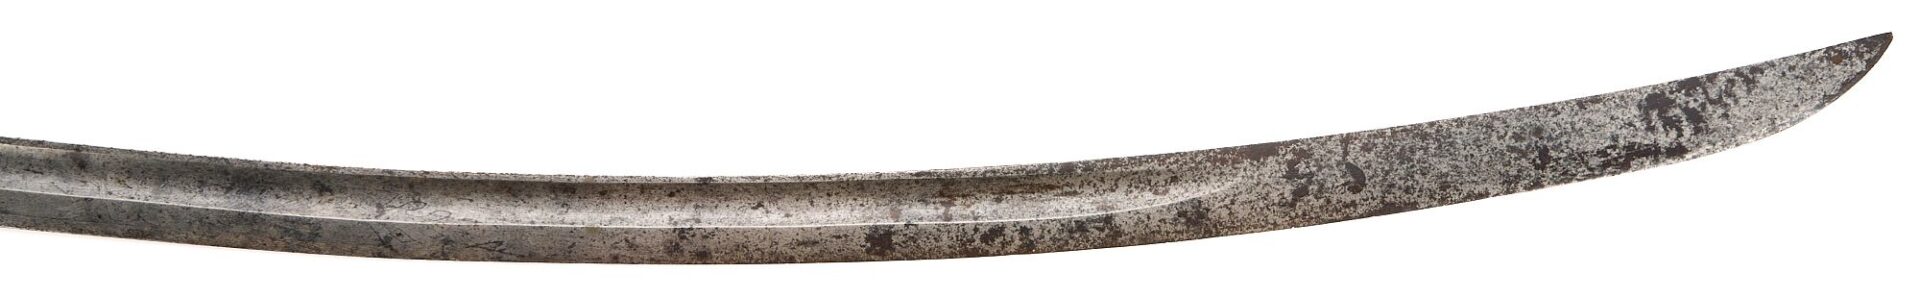 Lot 535: 2 Eagle Head Swords, incl. 1 with Metal Scabbard